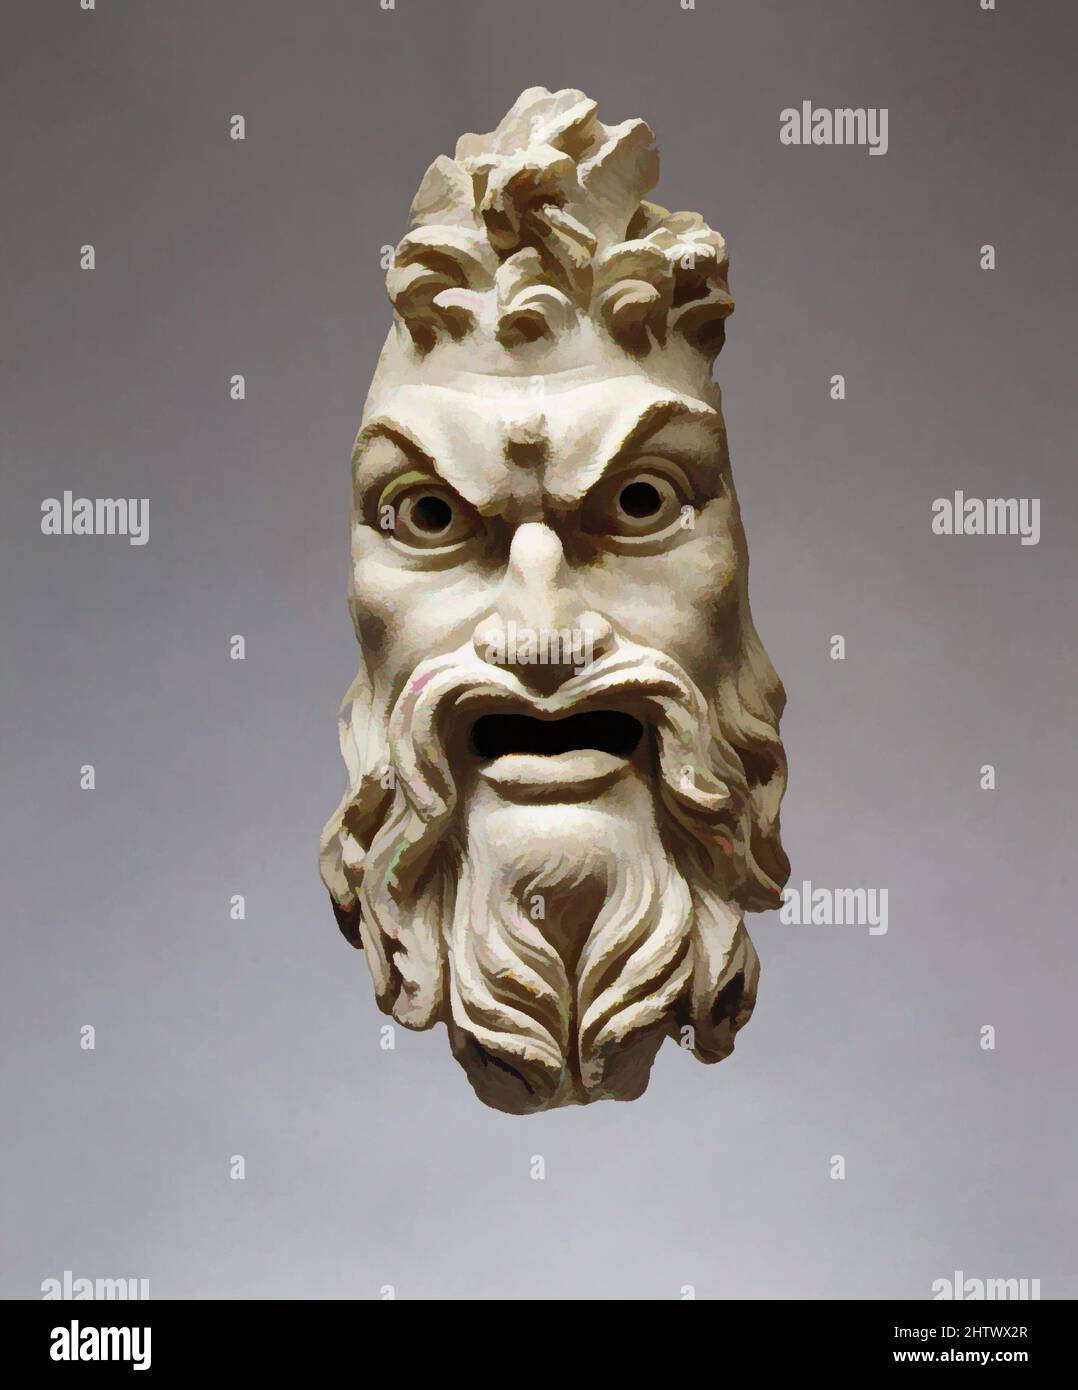 Art inspired by Marble mask of Pan, Early Imperial, 1st century A.D., Roman, Marble, H. 11 1/8 in. (28.3 cm); width 5 in. (12.7 cm); depth 3 1/2 in. (8.9 cm), Stone Sculpture, The remains of two horns set in the bristling hair identify this bearded mask as that of Pan, the rustic goat, Classic works modernized by Artotop with a splash of modernity. Shapes, color and value, eye-catching visual impact on art. Emotions through freedom of artworks in a contemporary way. A timeless message pursuing a wildly creative new direction. Artists turning to the digital medium and creating the Artotop NFT Stock Photo